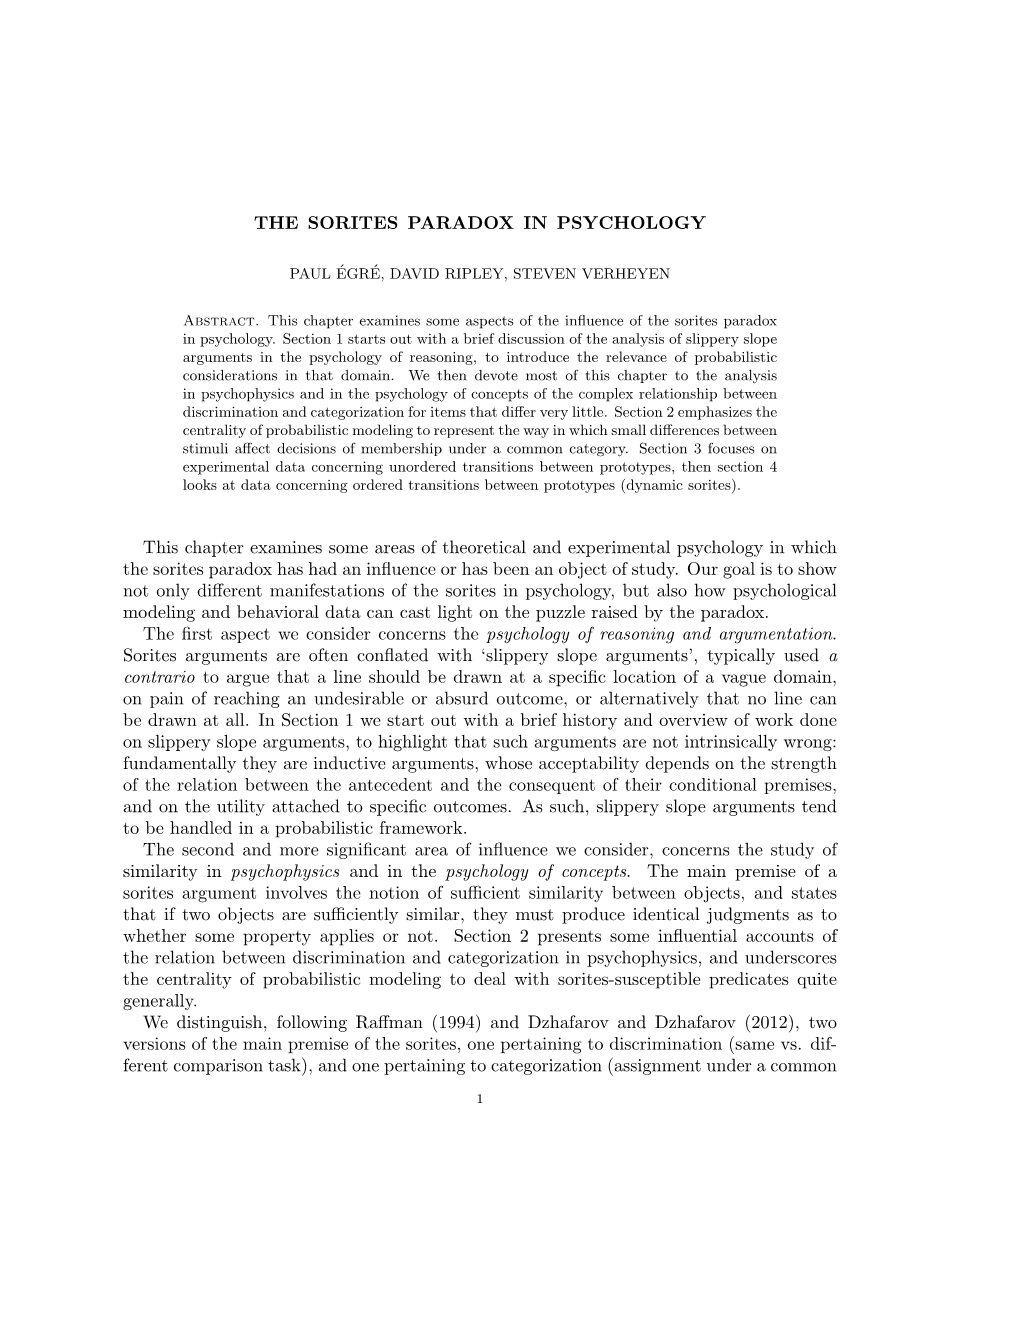 THE SORITES PARADOX in PSYCHOLOGY This Chapter Examines Some Areas of Theoretical and Experimental Psychology in Which the Sorit